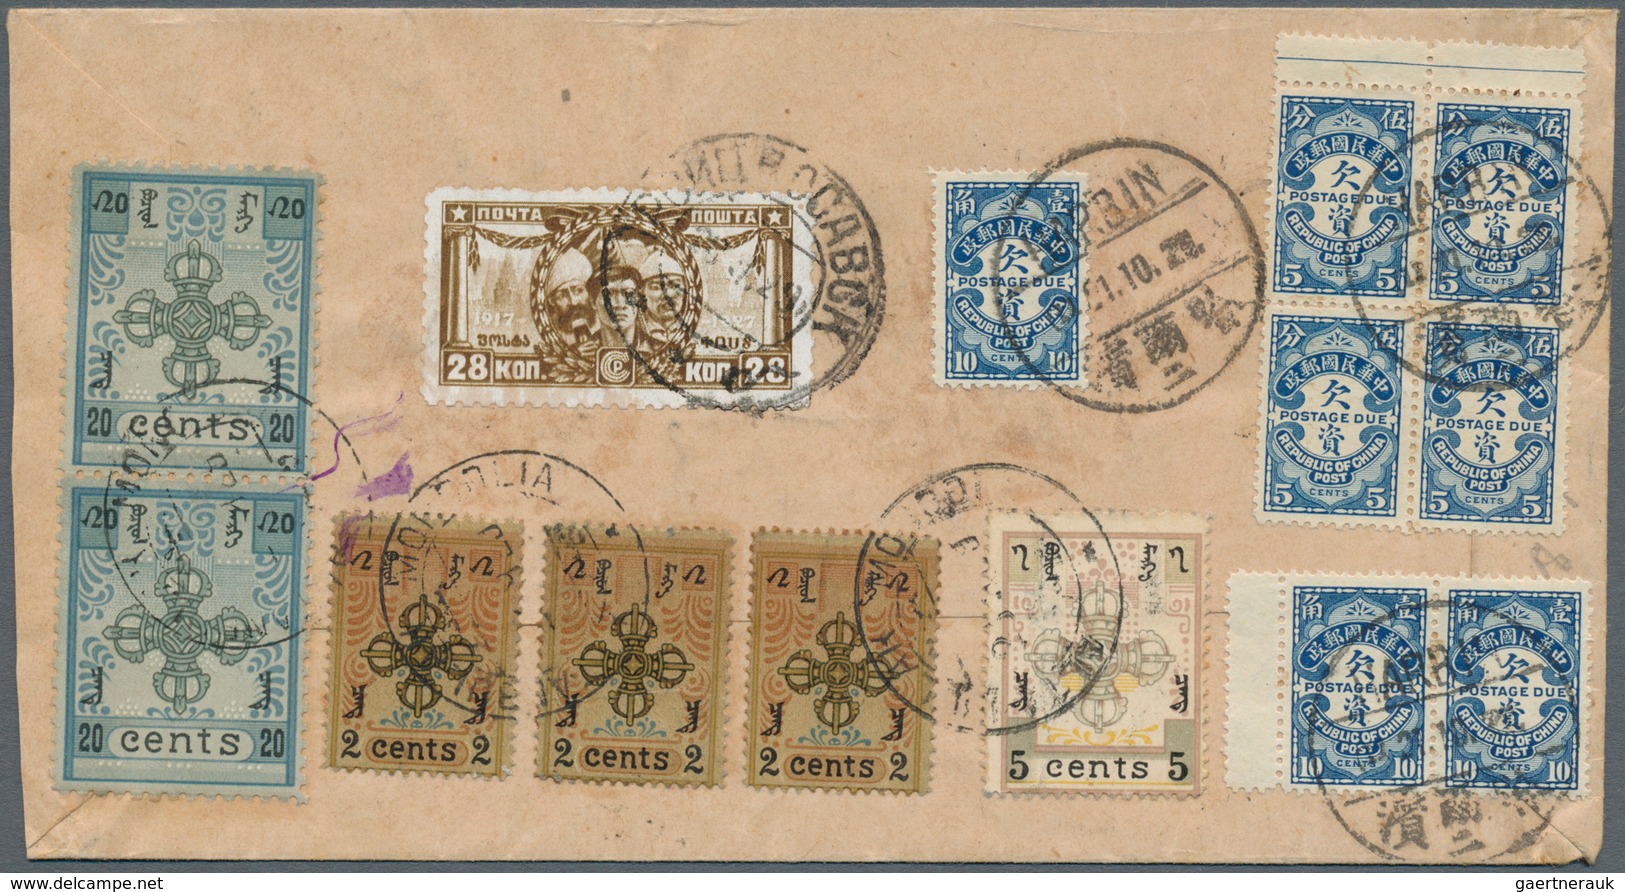 China - Portomarken: 1929 Registered Cover With Russian/Mongolian/Chinese Mixed Franking From A Russ - Postage Due